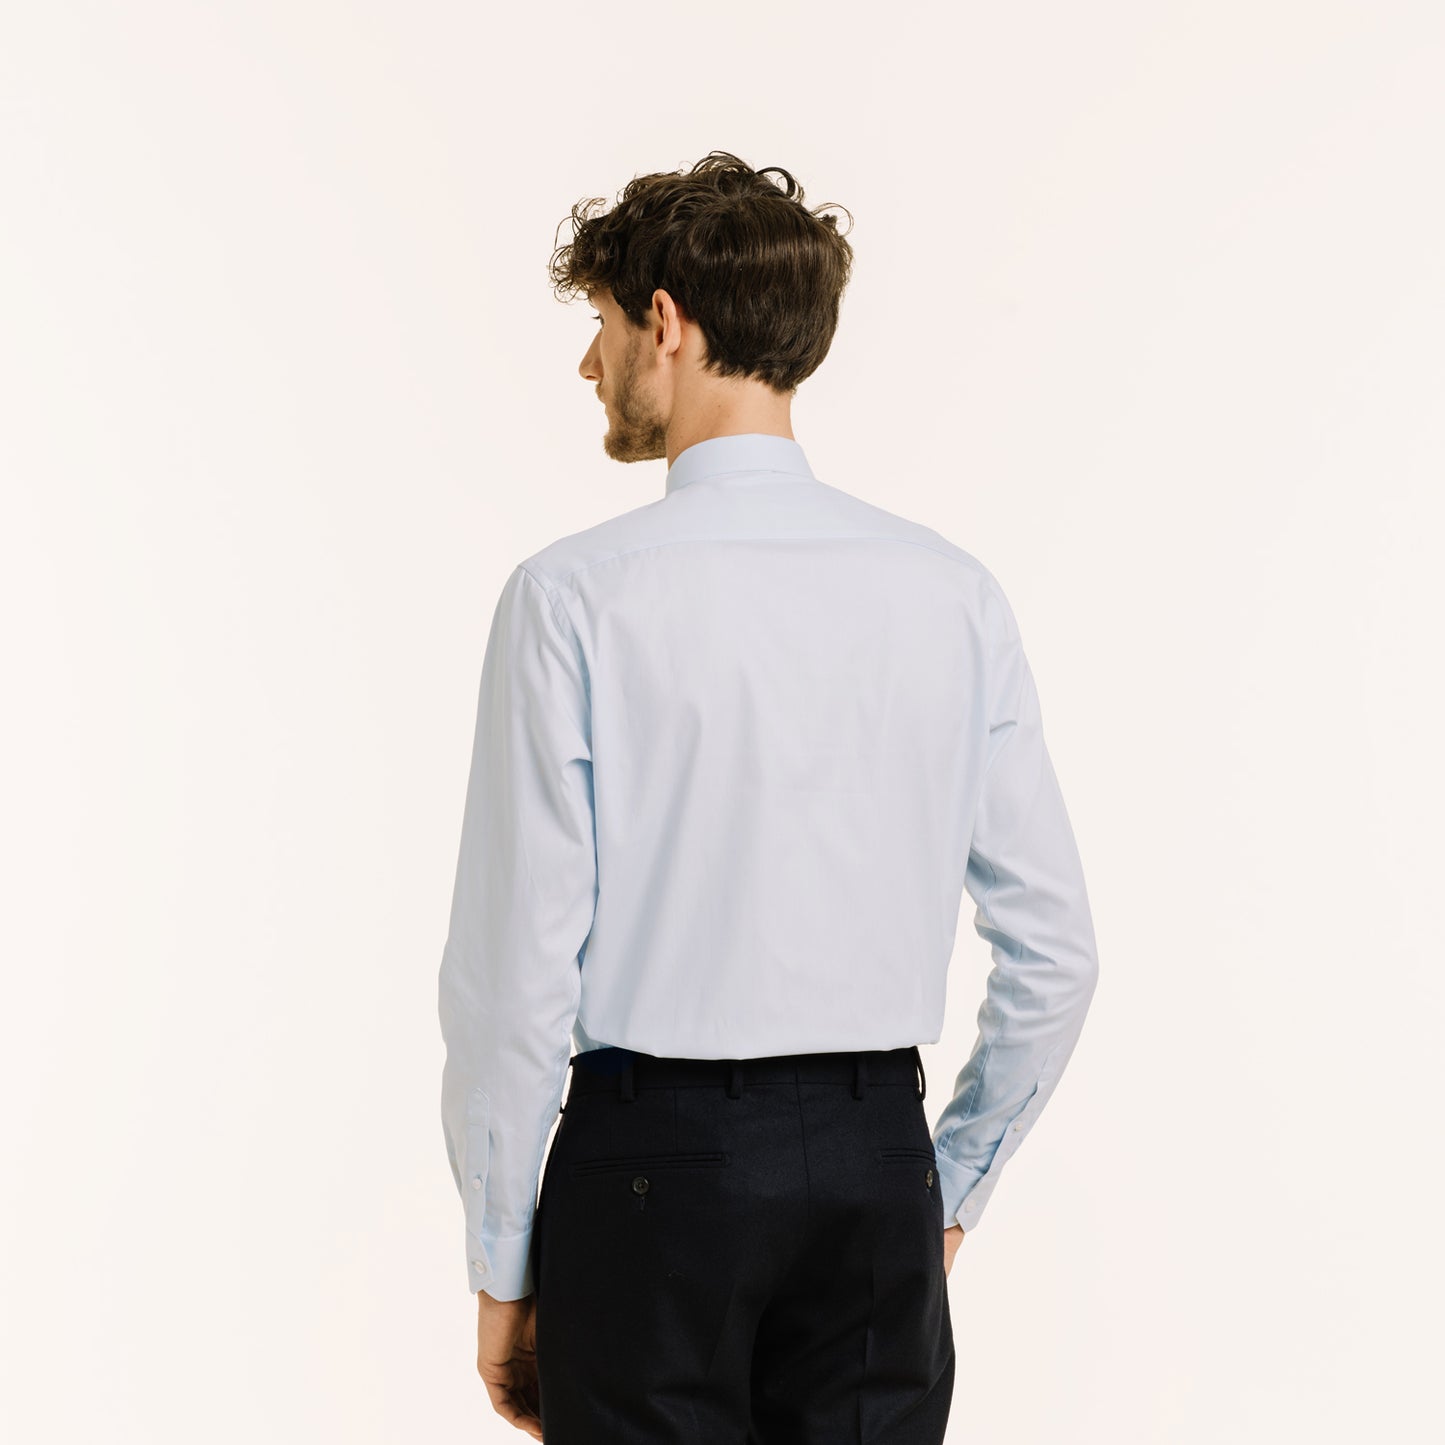 Sky blue double-twisted Oxford shirt